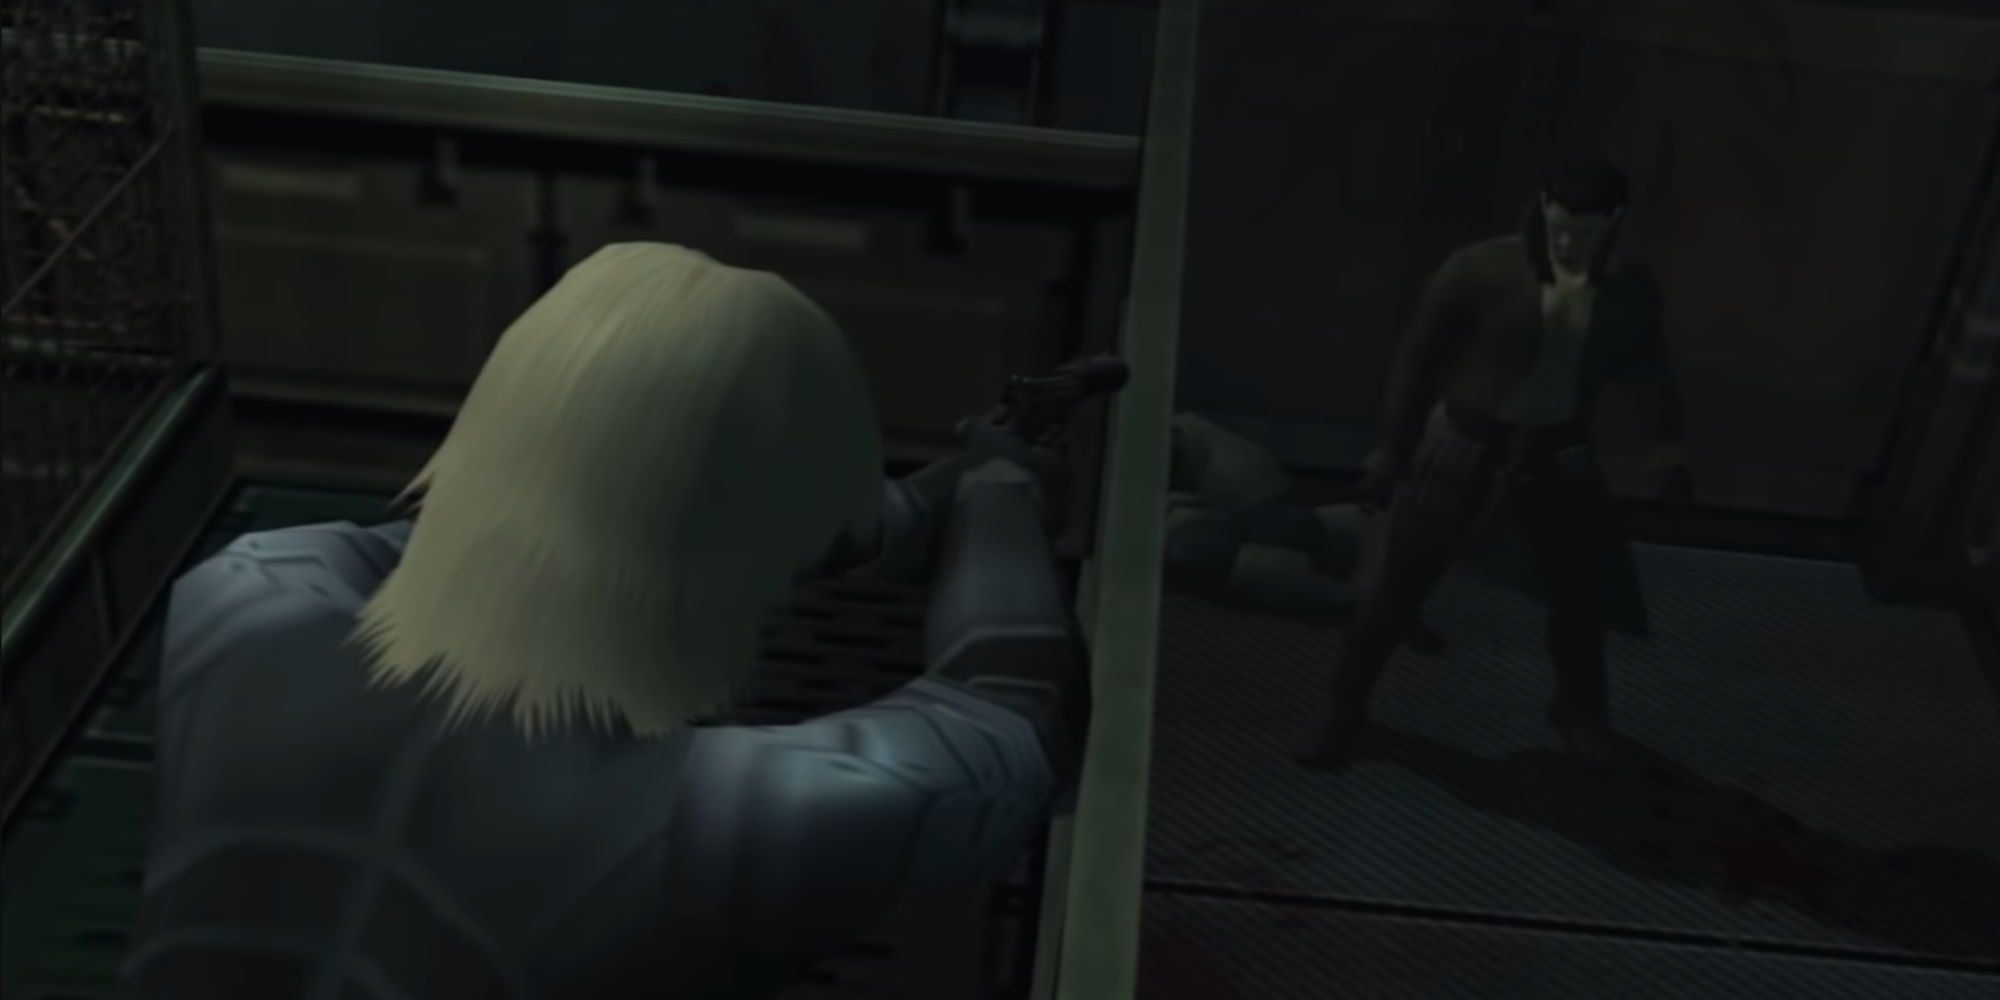 Vamp with Raiden, who is aiming a gun at him, in an industrial-looking area Metal Gear Solid 2 Sons of Liberty